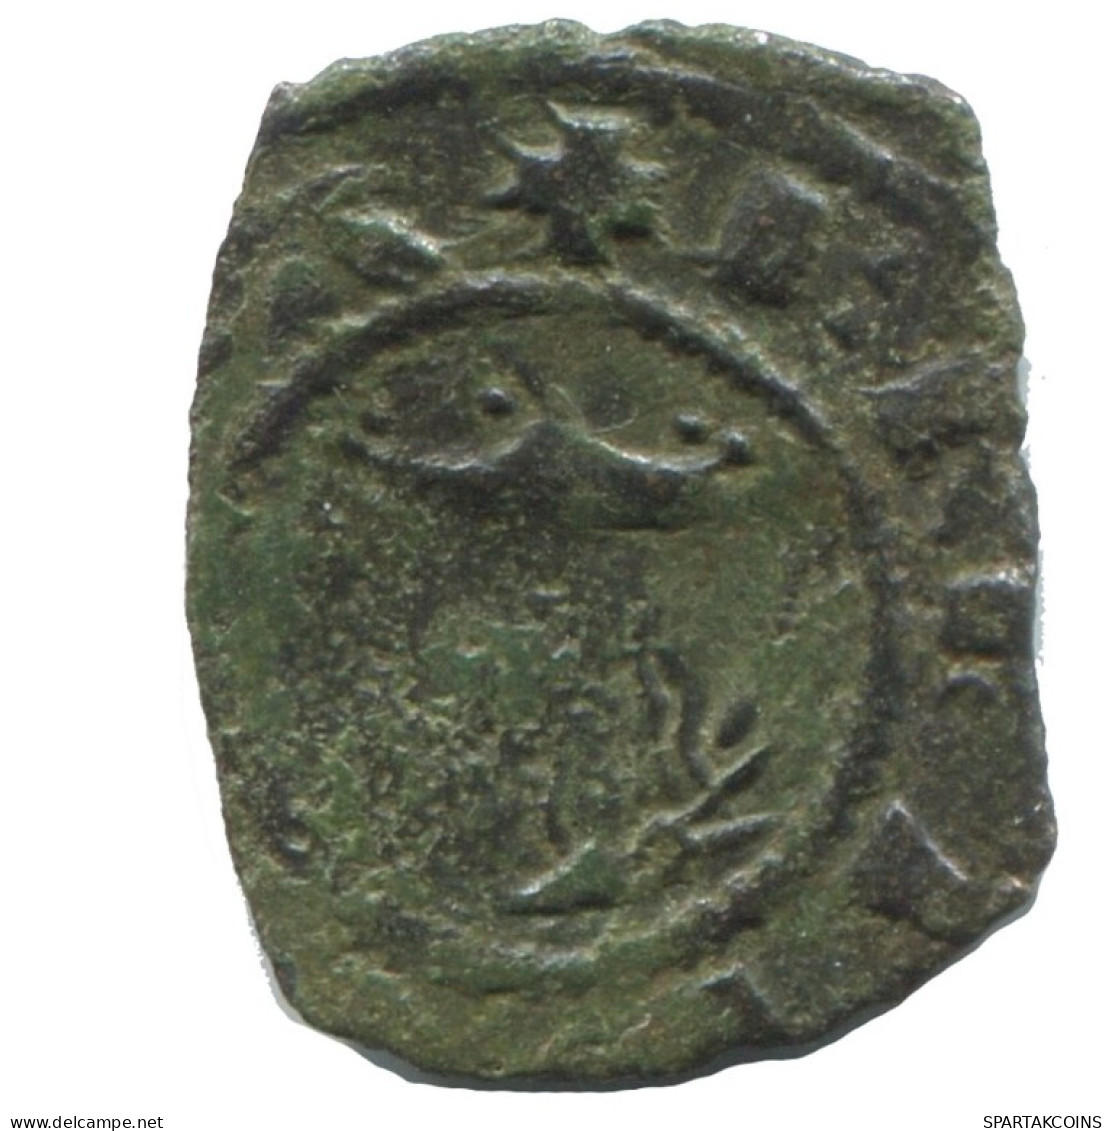 CRUSADER CROSS Authentic Original MEDIEVAL EUROPEAN Coin 0.7g/20mm #AC201.8.F.A - Other - Europe